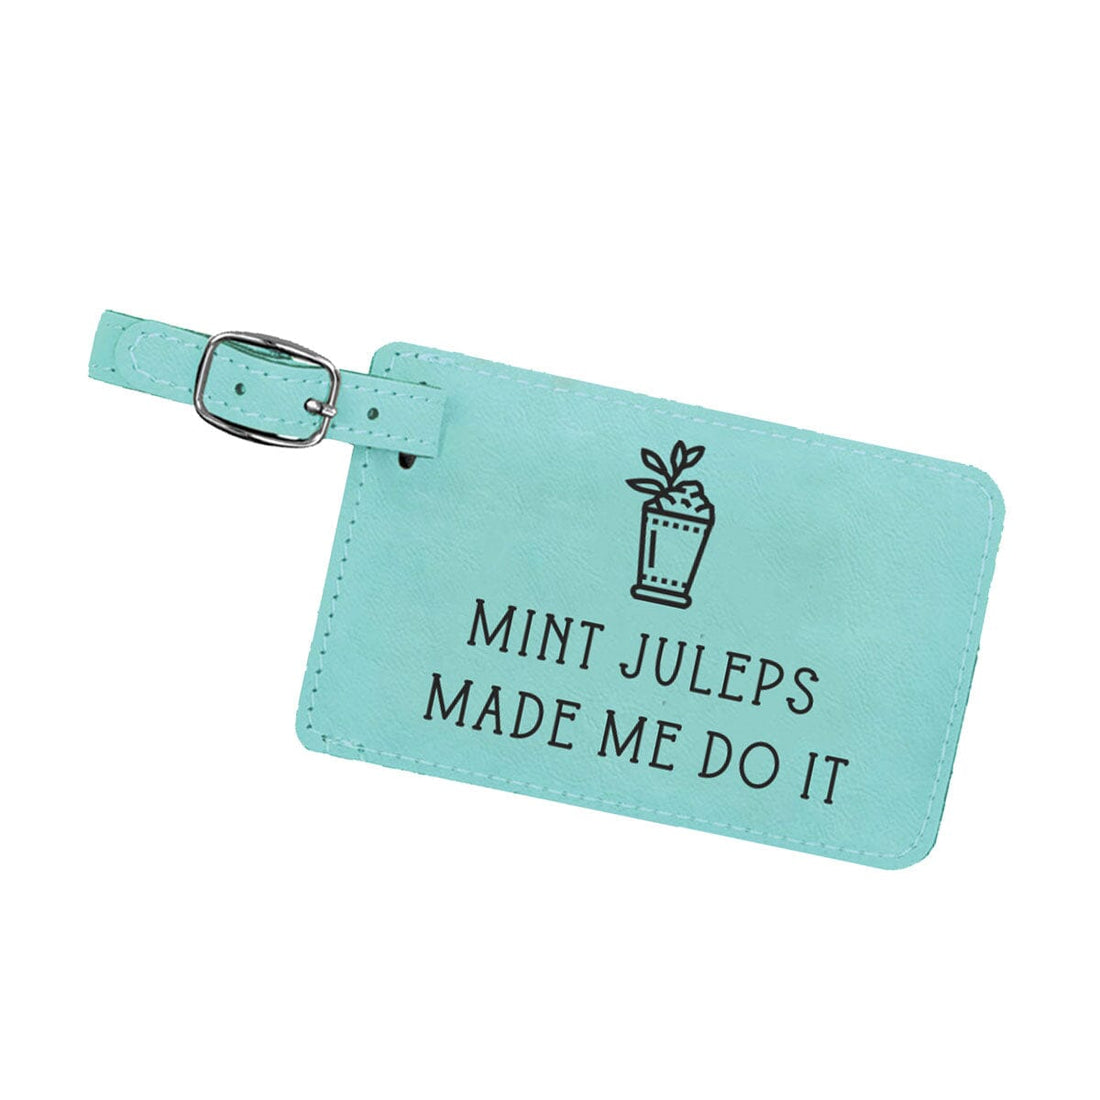 Mint Juleps Made Me Do It Teal Luggage Tag